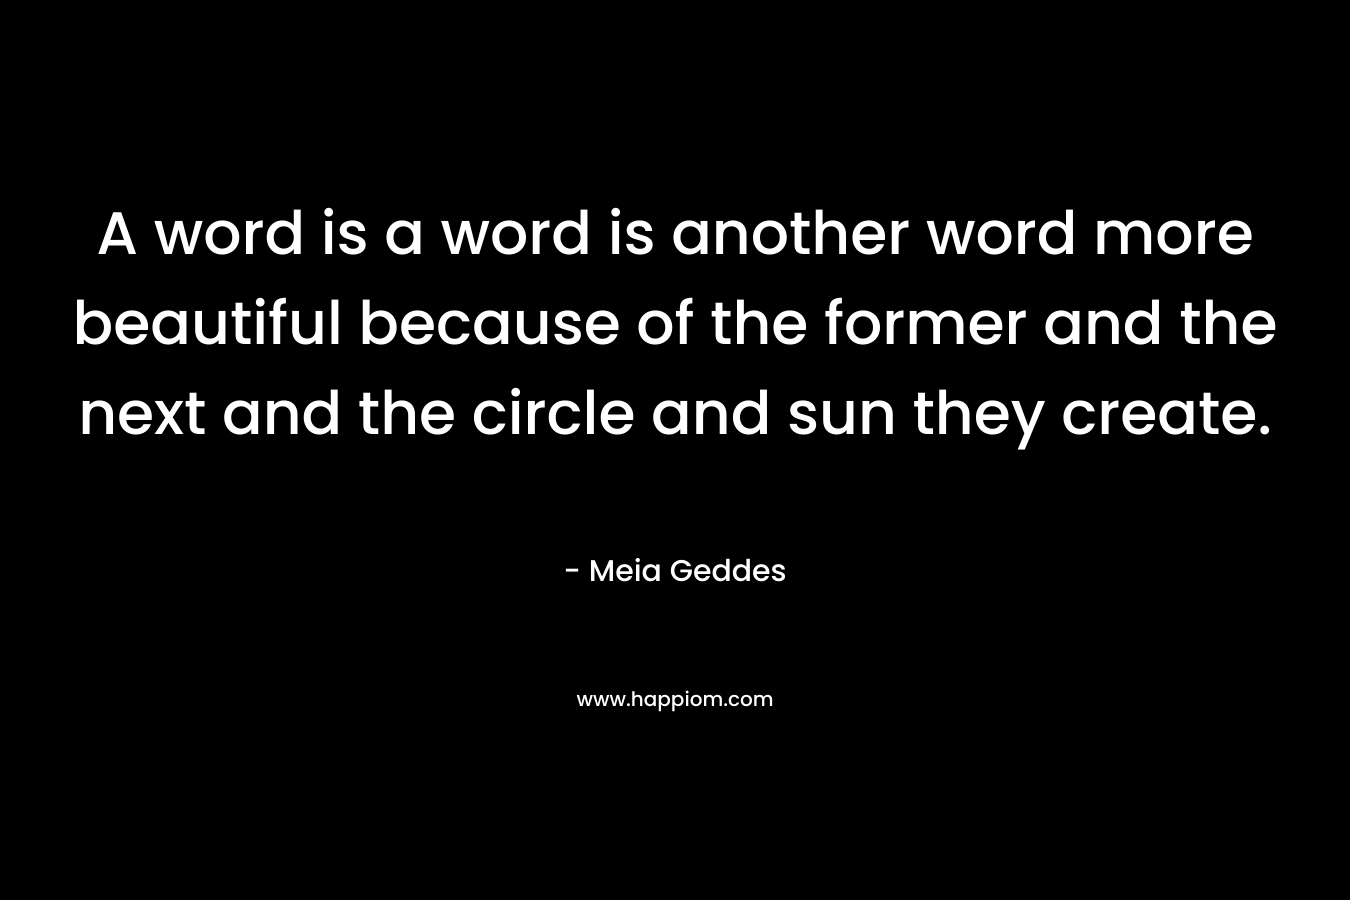 A word is a word is another word more beautiful because of the former and the next and the circle and sun they create.